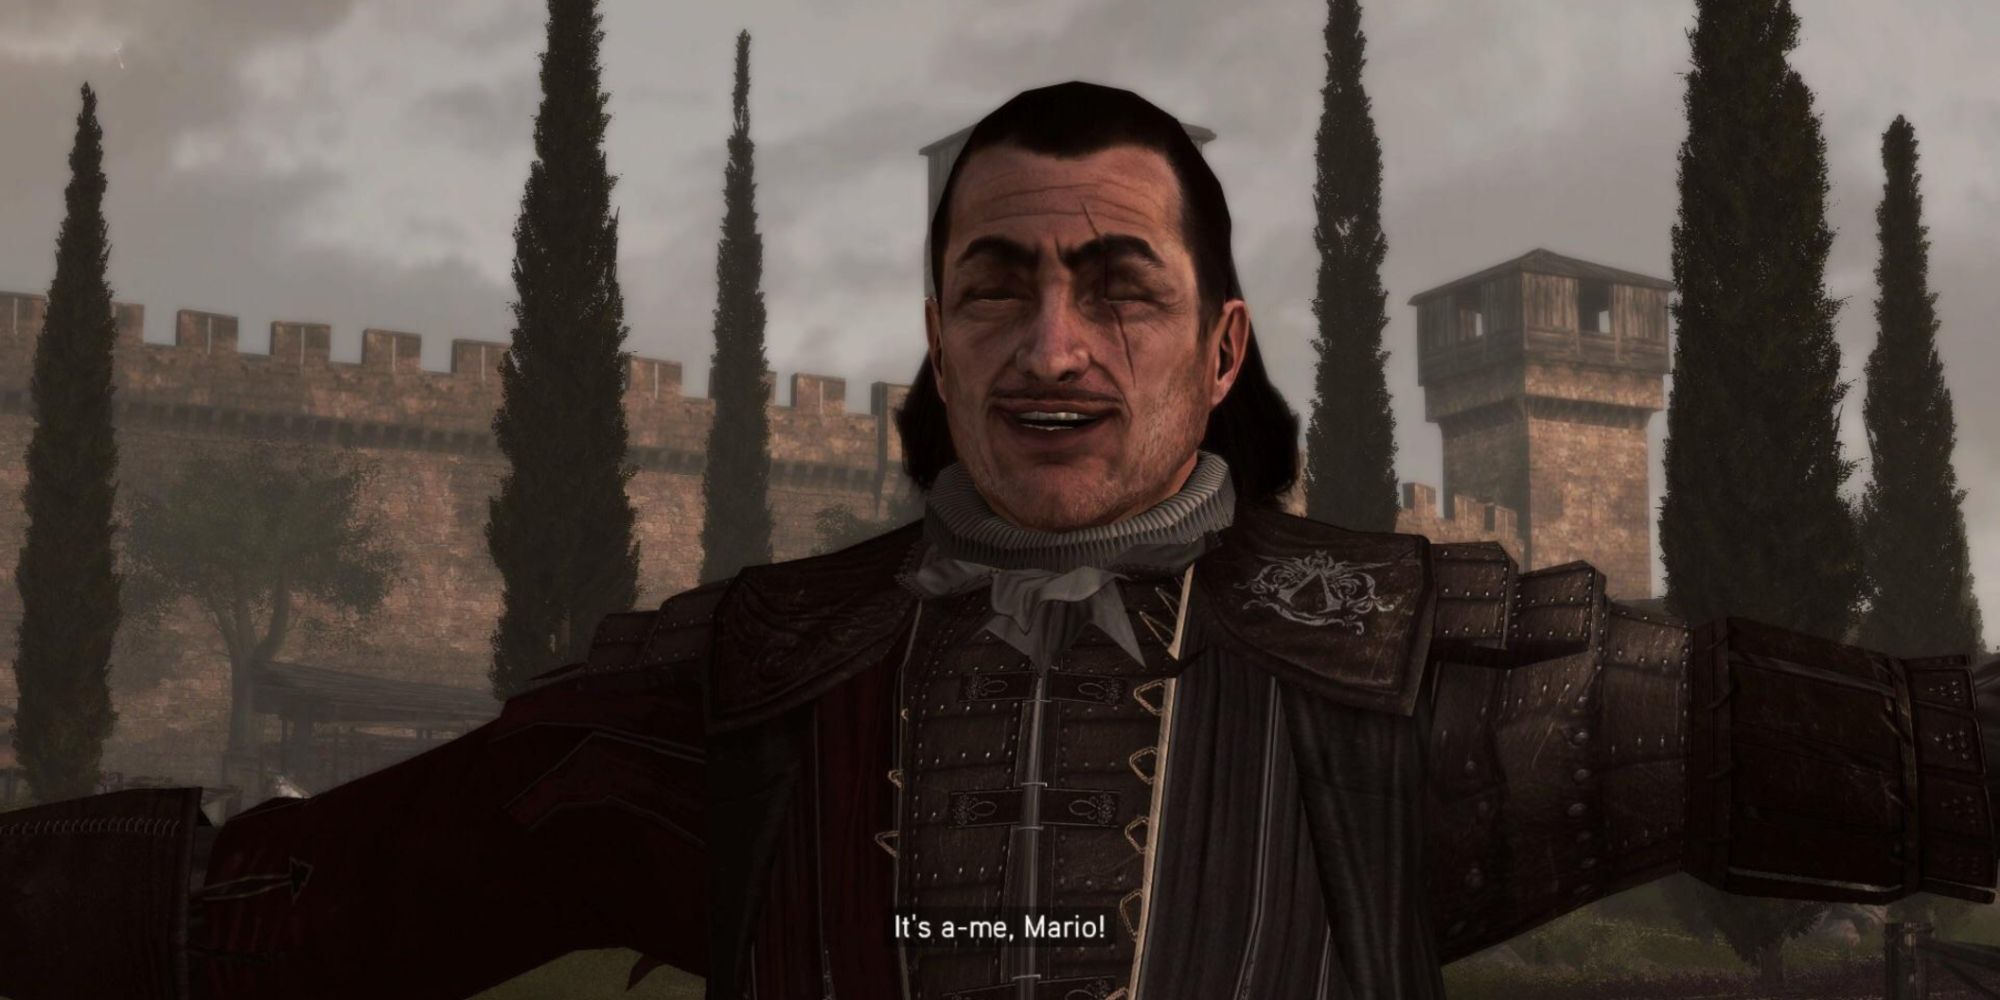 Uncle Mario's introduction in Assassin's Creed 2